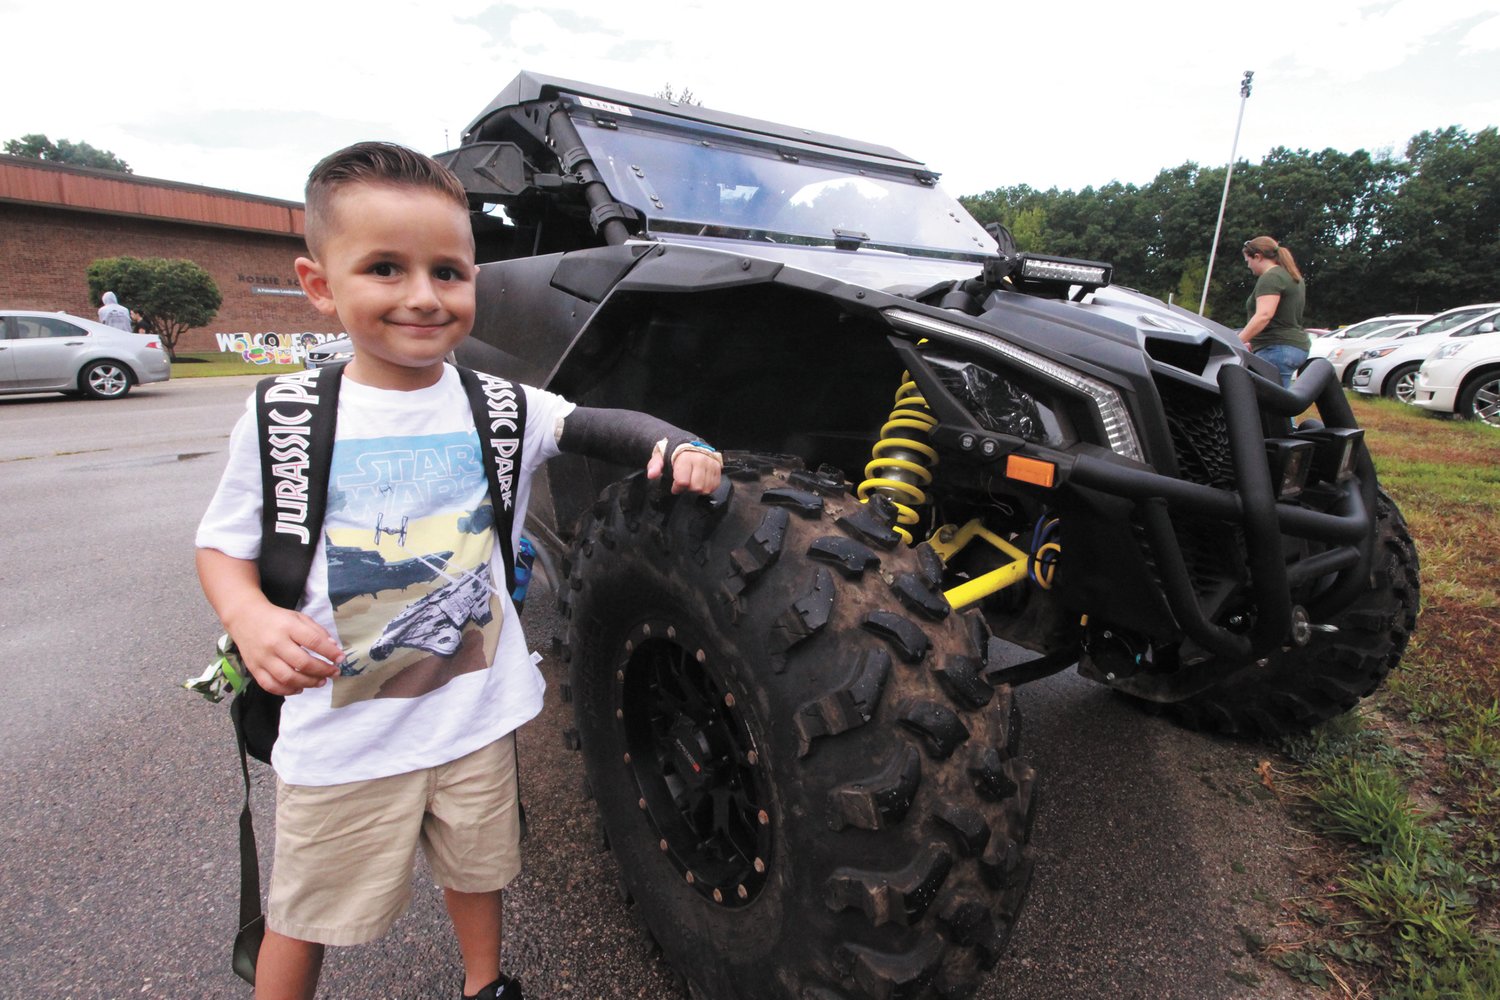 SOME WHEELS: Hoxsie kindergartener Liam Feola got a special ride on the first day of school in this Can Am that drew looks from fellow students and adults